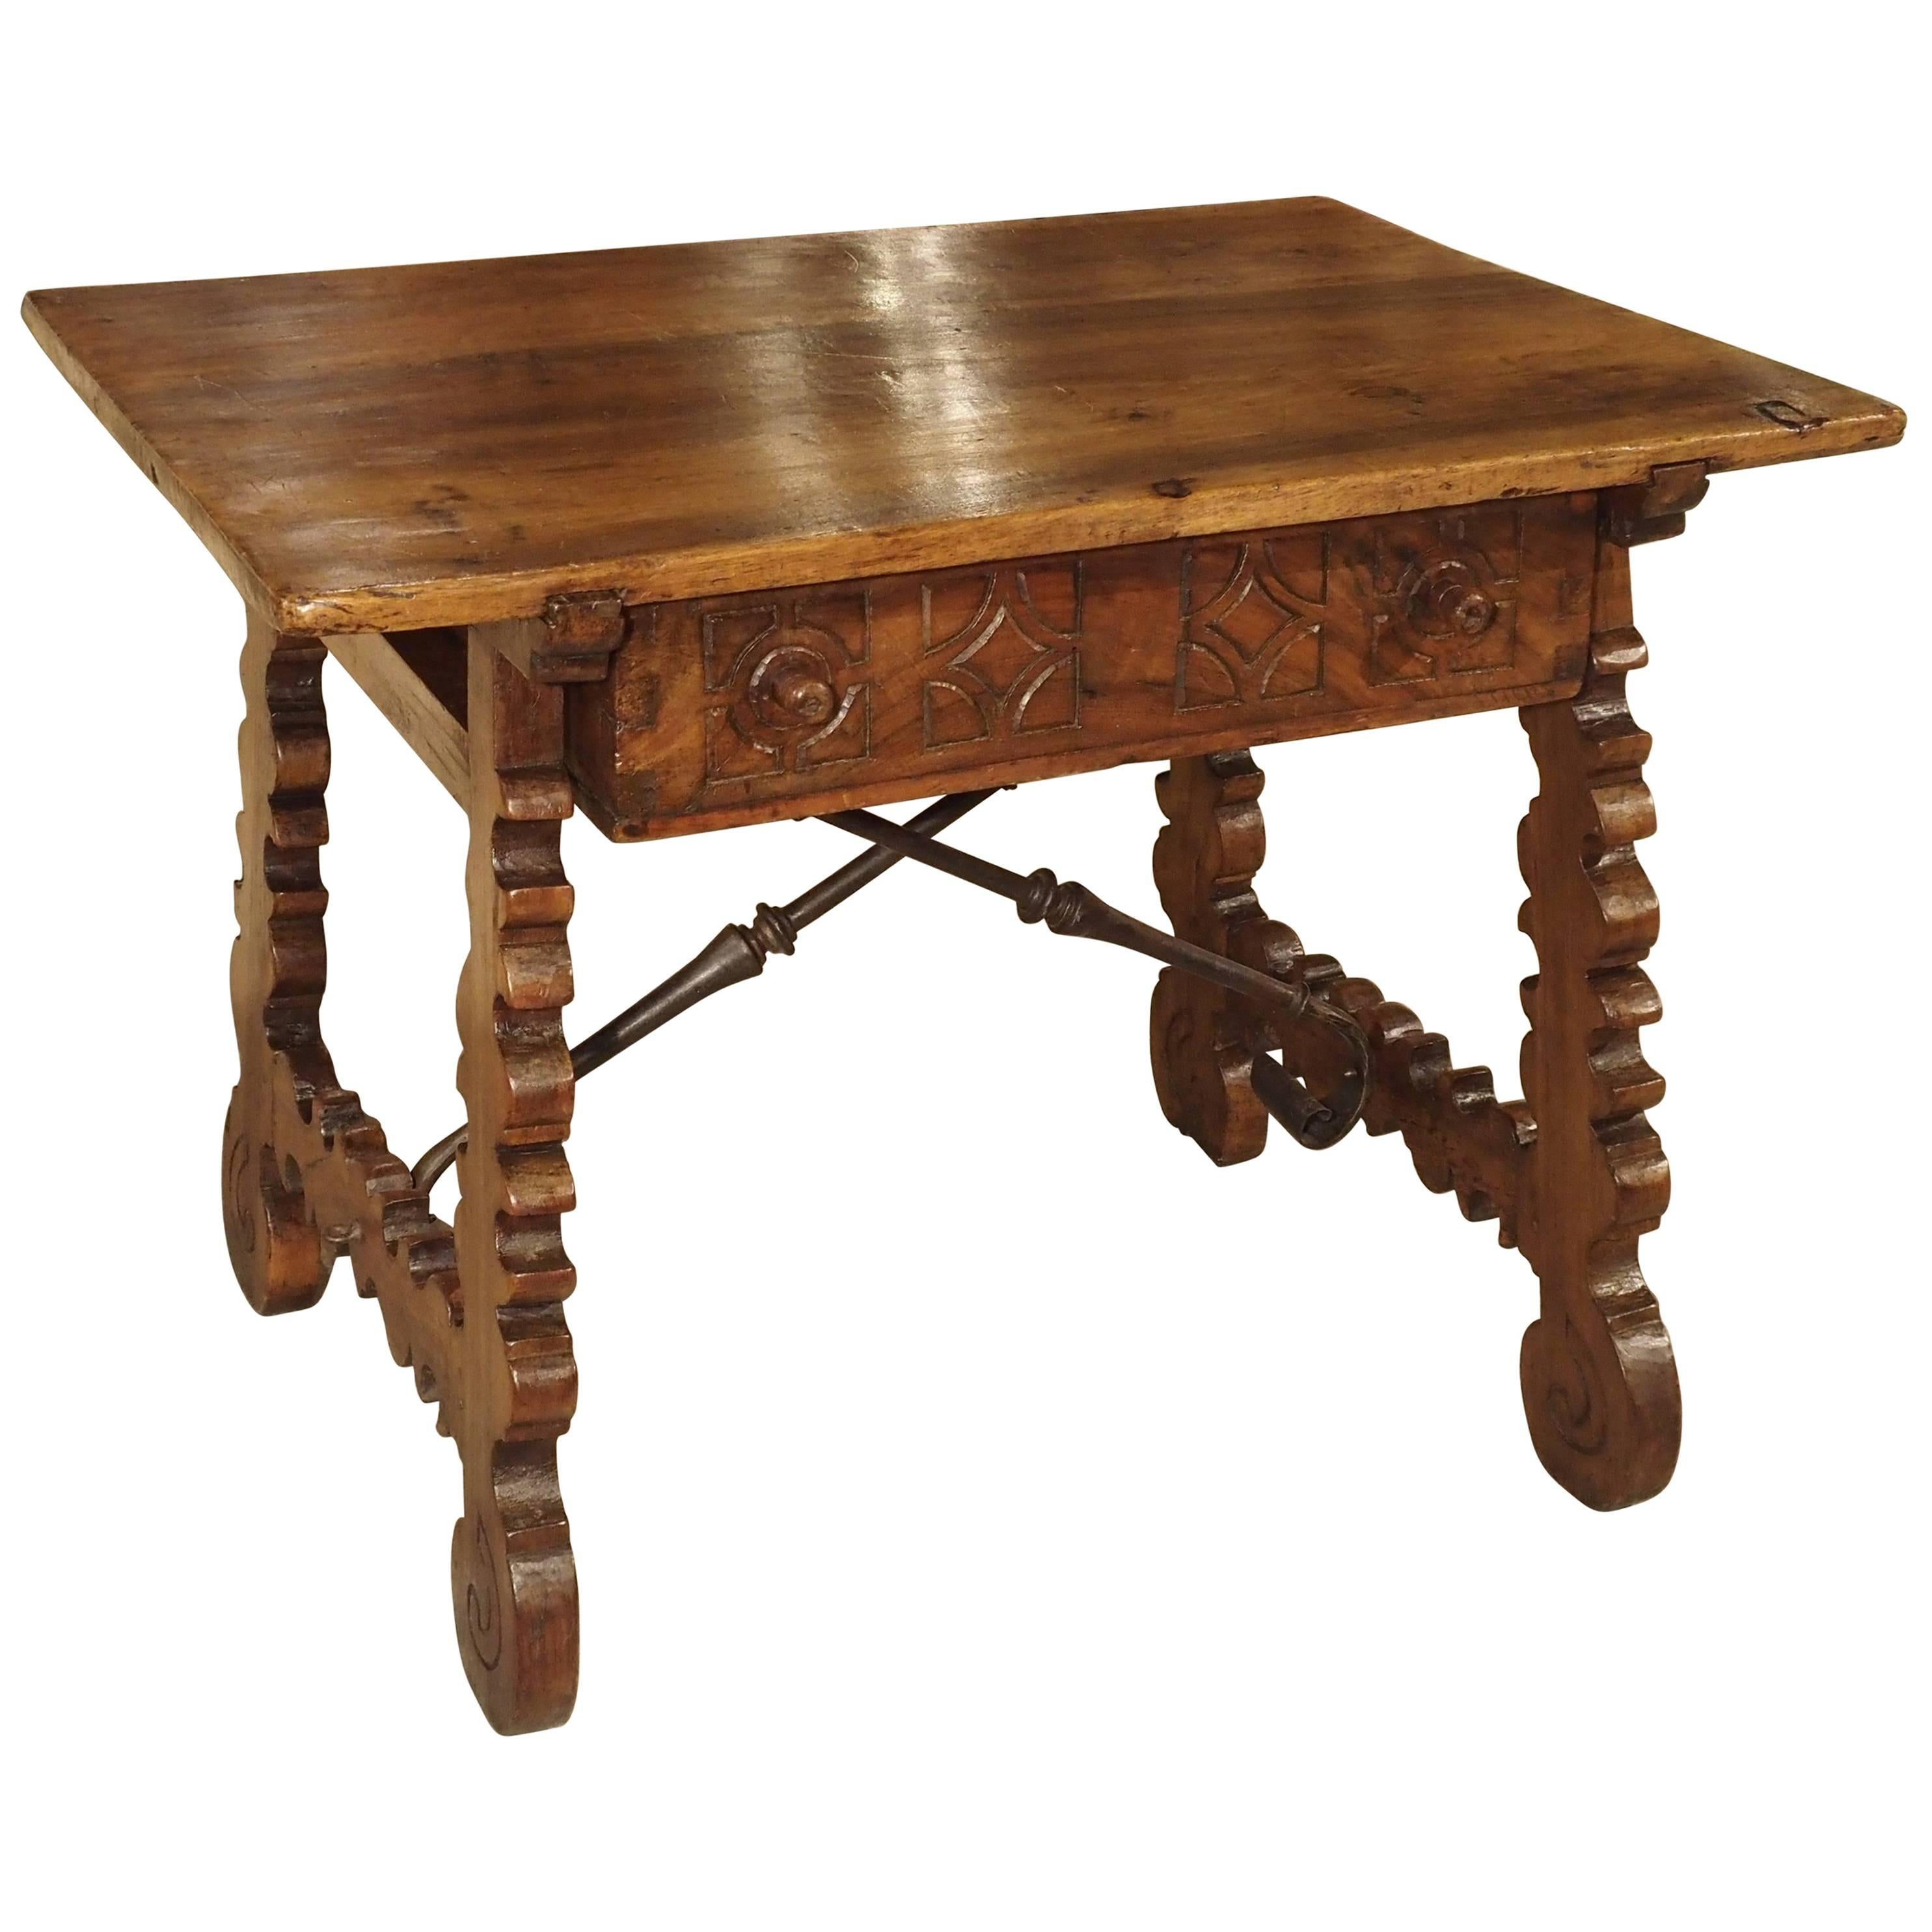 17th Century Walnut Wood Table from Northern Spain